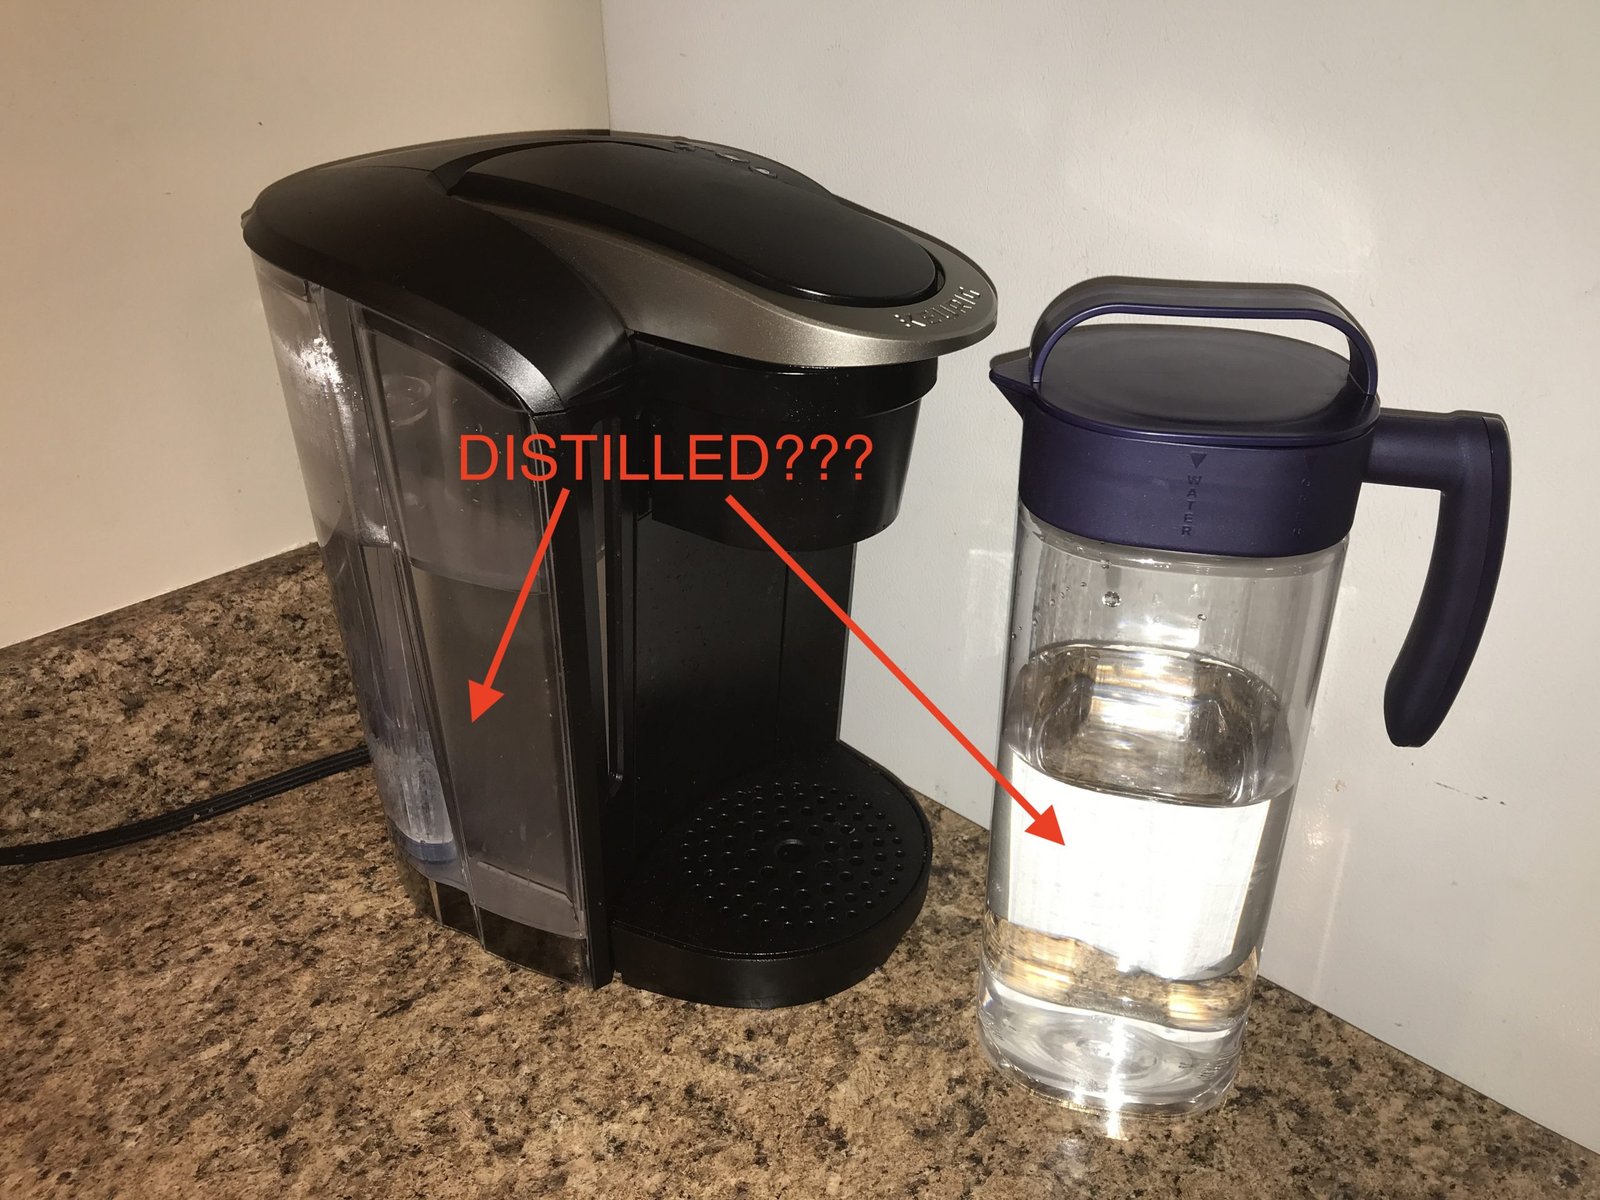 Can you use distilled water in a Keurig?